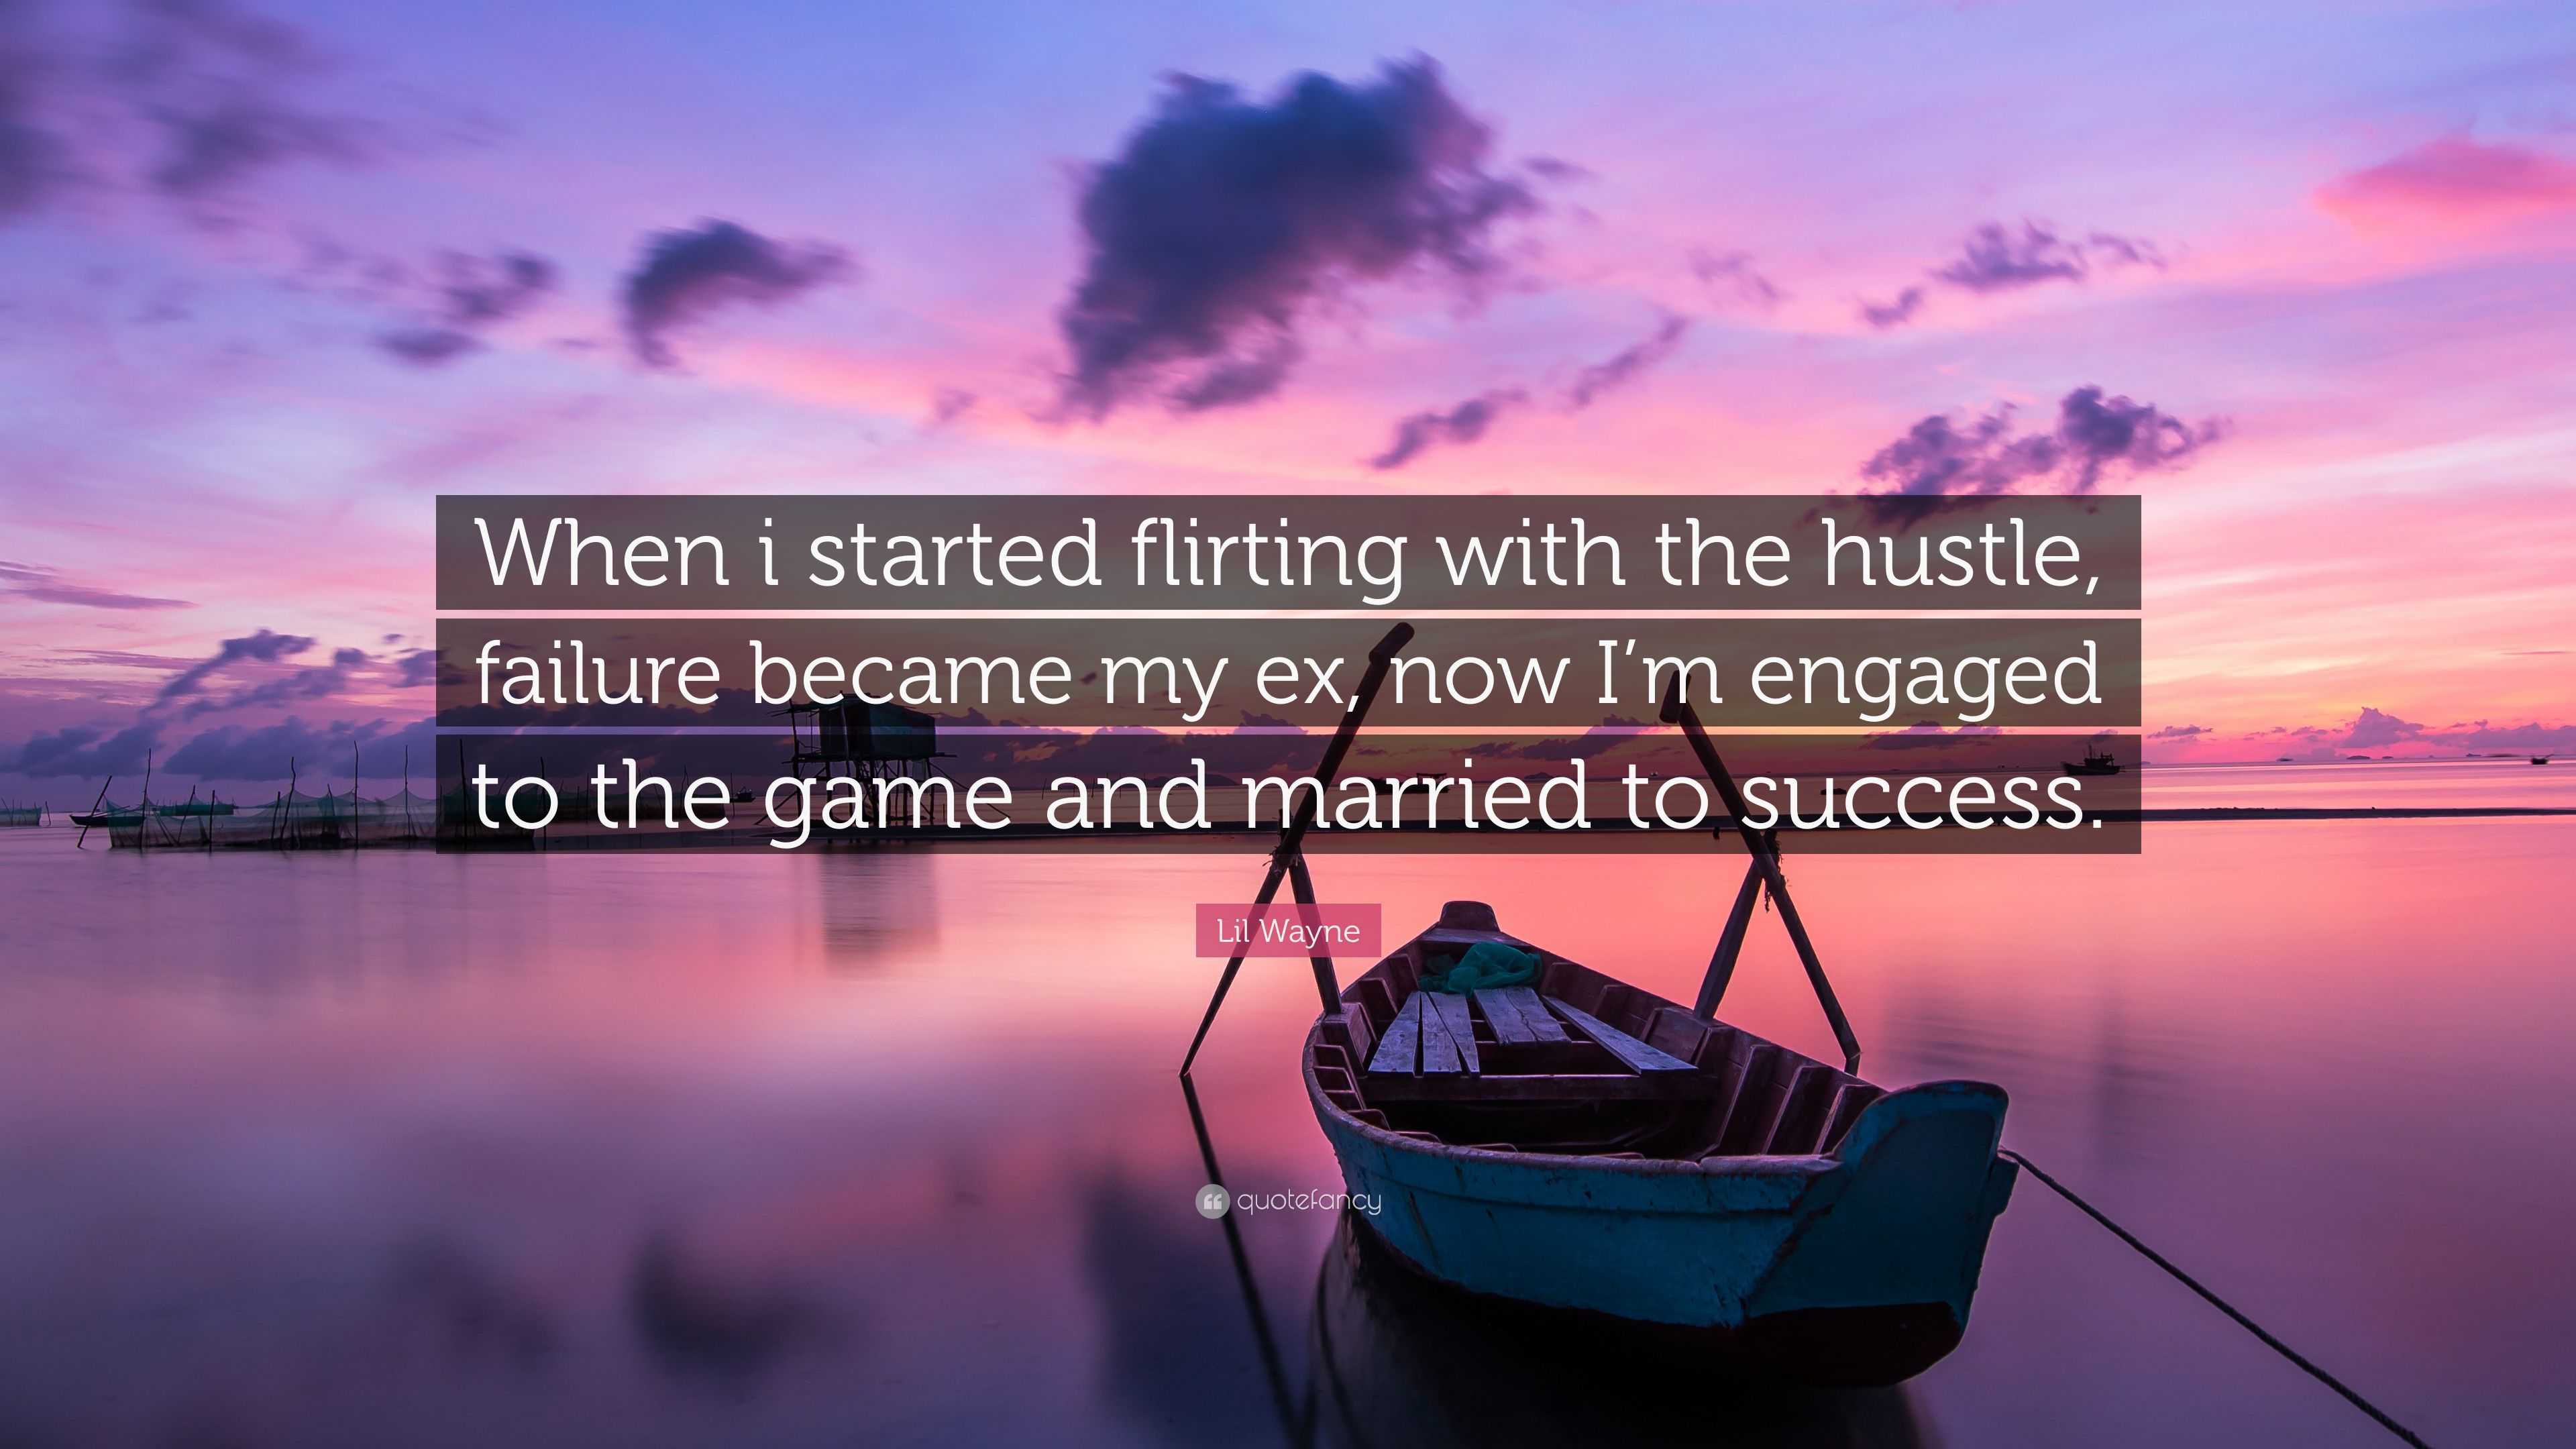 Lil Wayne Quote: “When i started flirting with the hustle, failure became my ex, now ...3840 x 2160